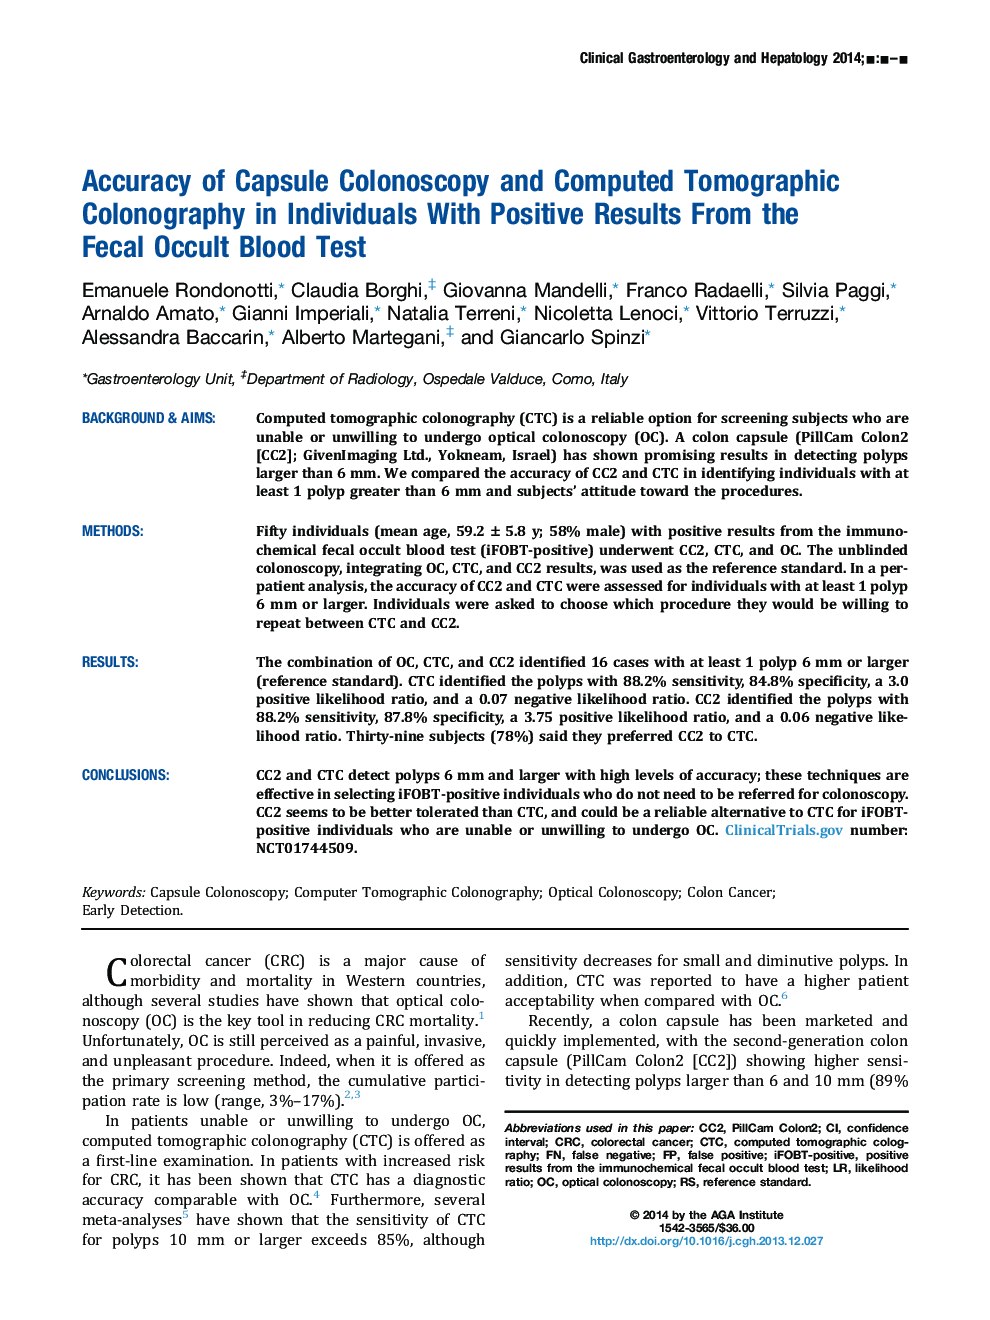 Accuracy of Capsule Colonoscopy and Computed Tomographic Colonography in Individuals With Positive Results From the Fecal Occult Blood Test